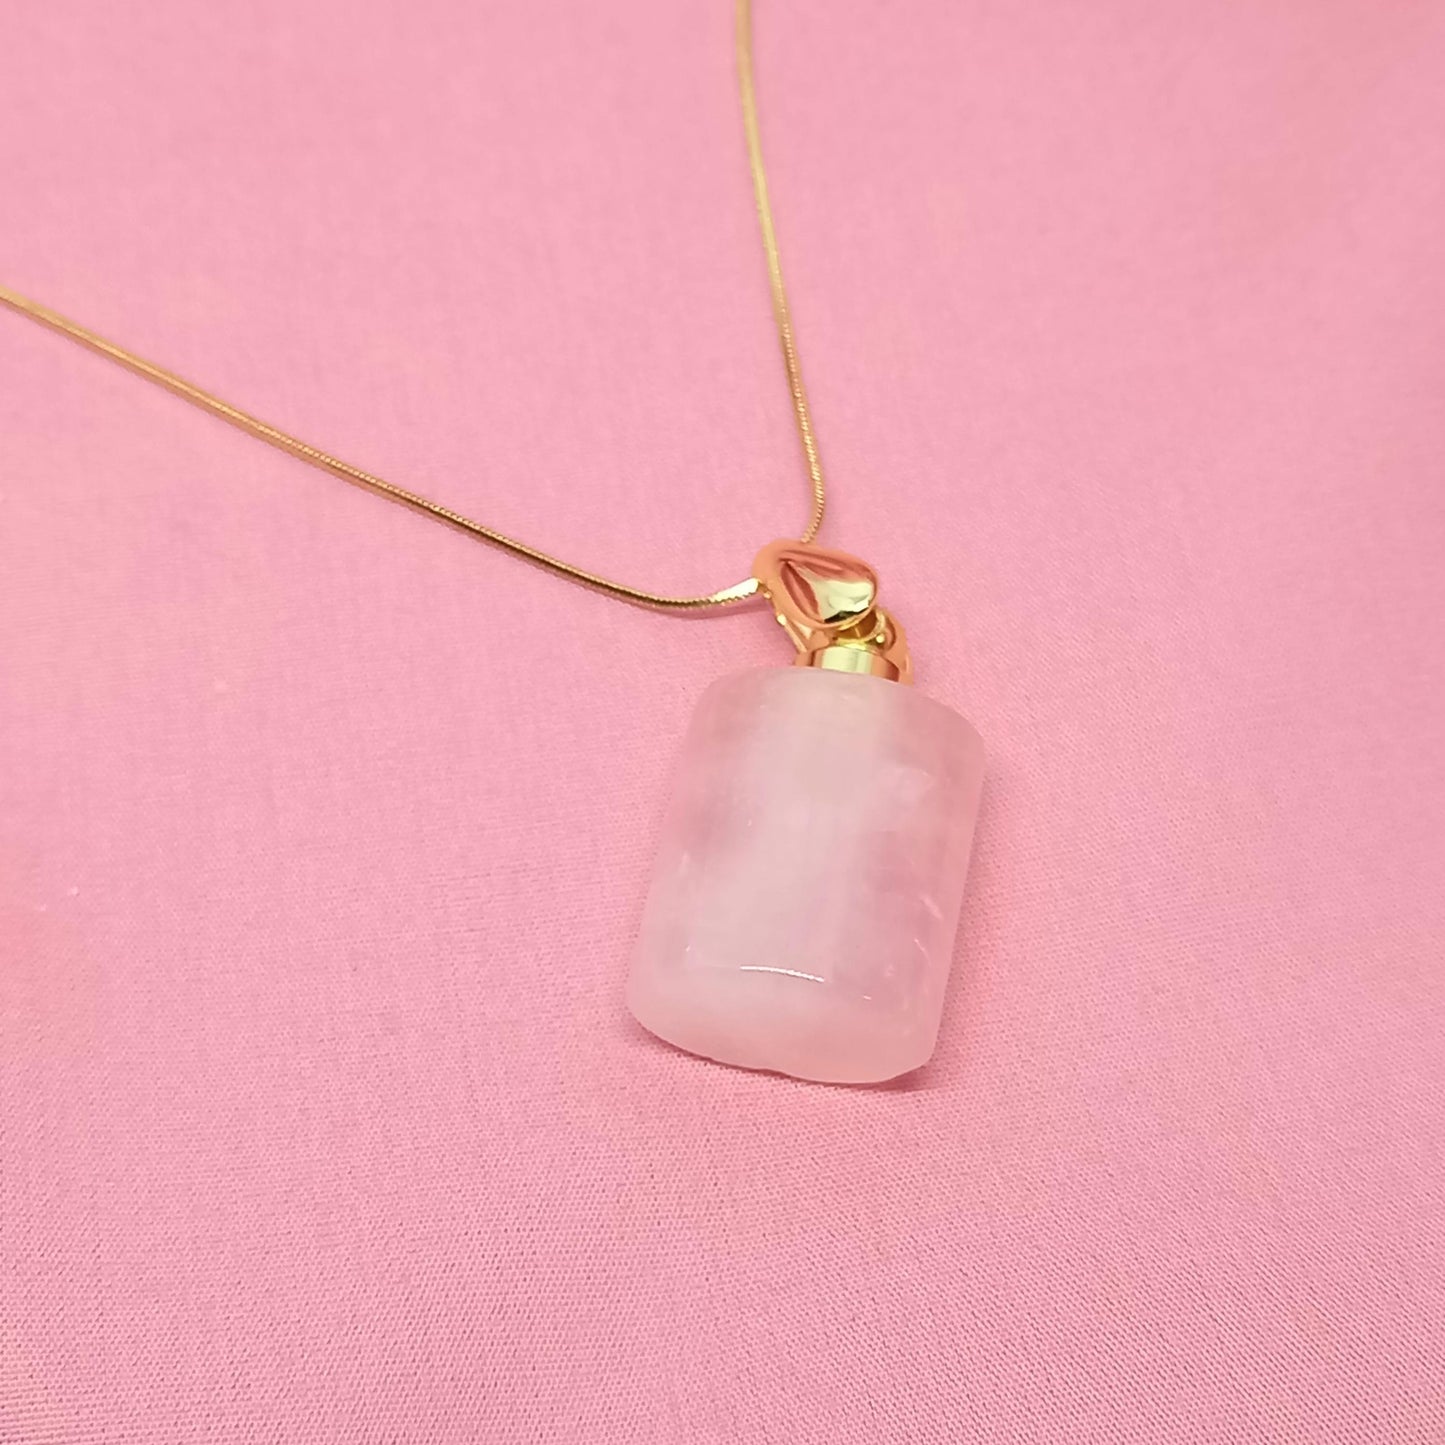 VIOLE PENDANT IN NATURAL ROSE QUARTZ STONES + STAINLESS STEEL NECKLACE